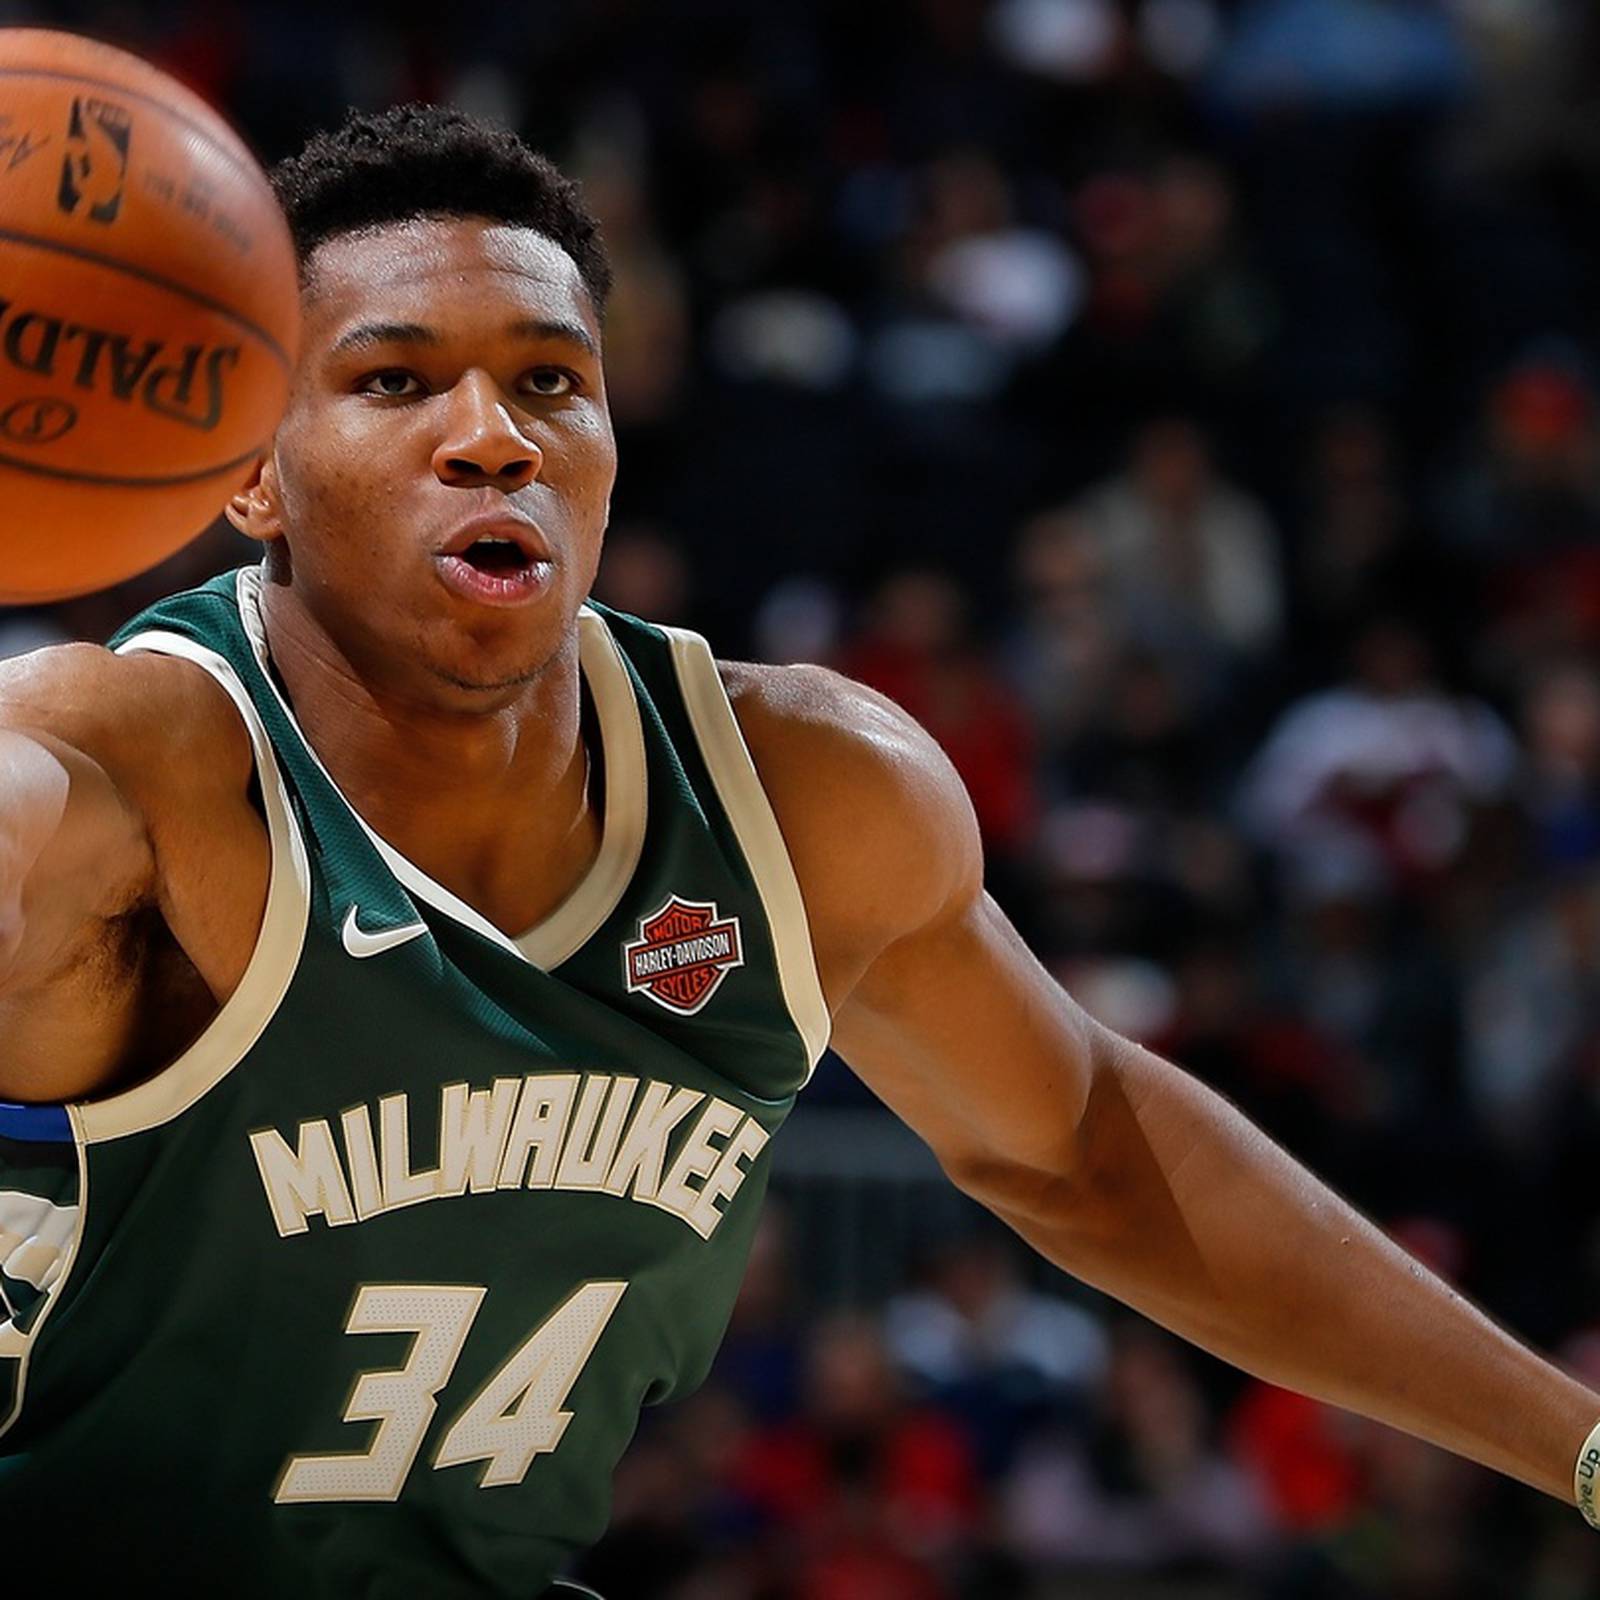 Giannis Antetokounmpo on His Personal Style, the NBA, and His Roots